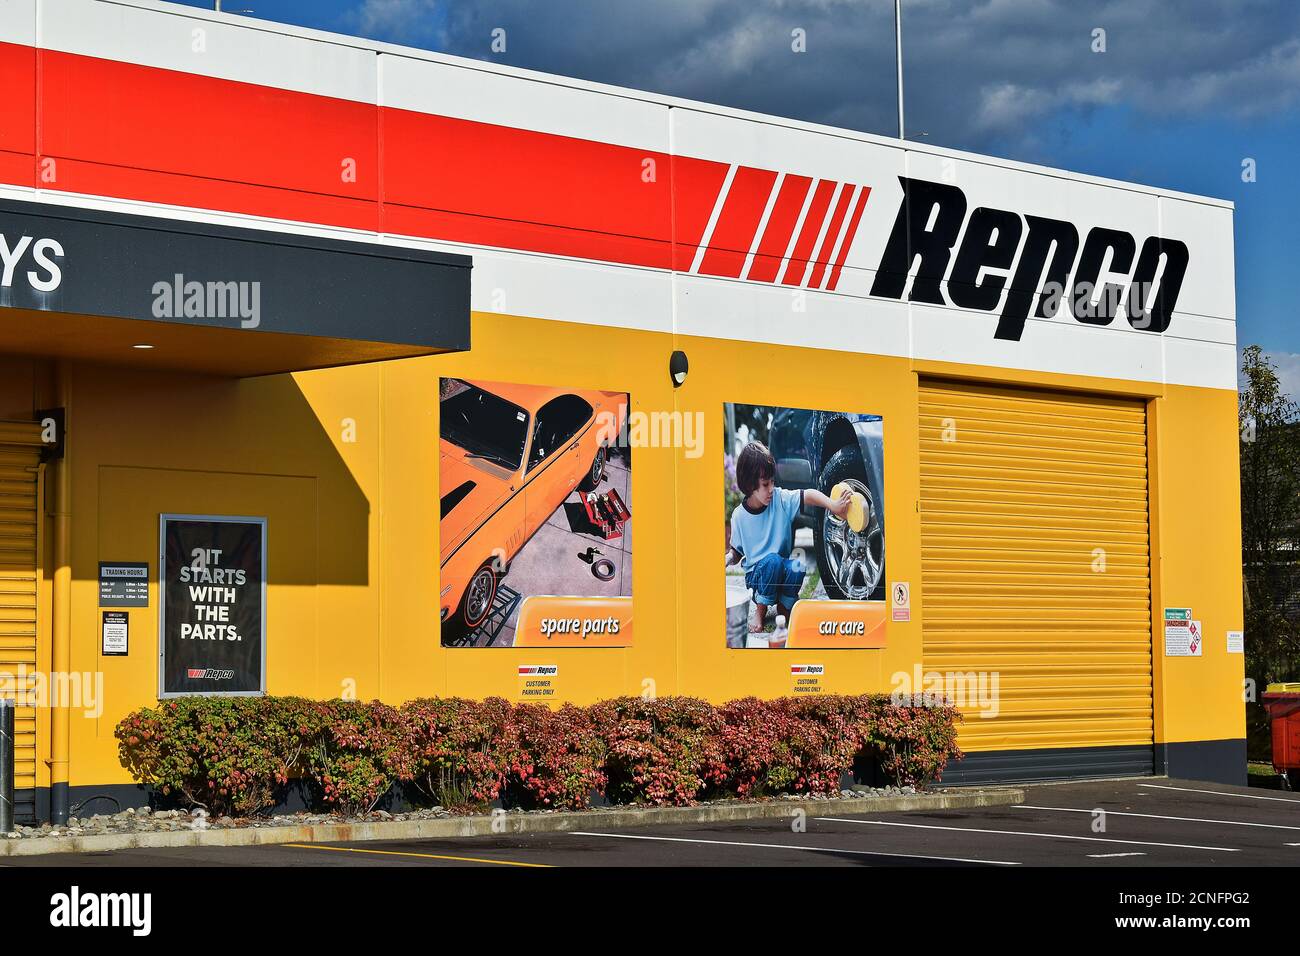 AUCKLAN, NEW ZEALAND - Apr 19, 2019: Auckland / New Zealand - April 19 2019: View of Repco reseller and supplier of automotive parts store front in Hi Stock Photo